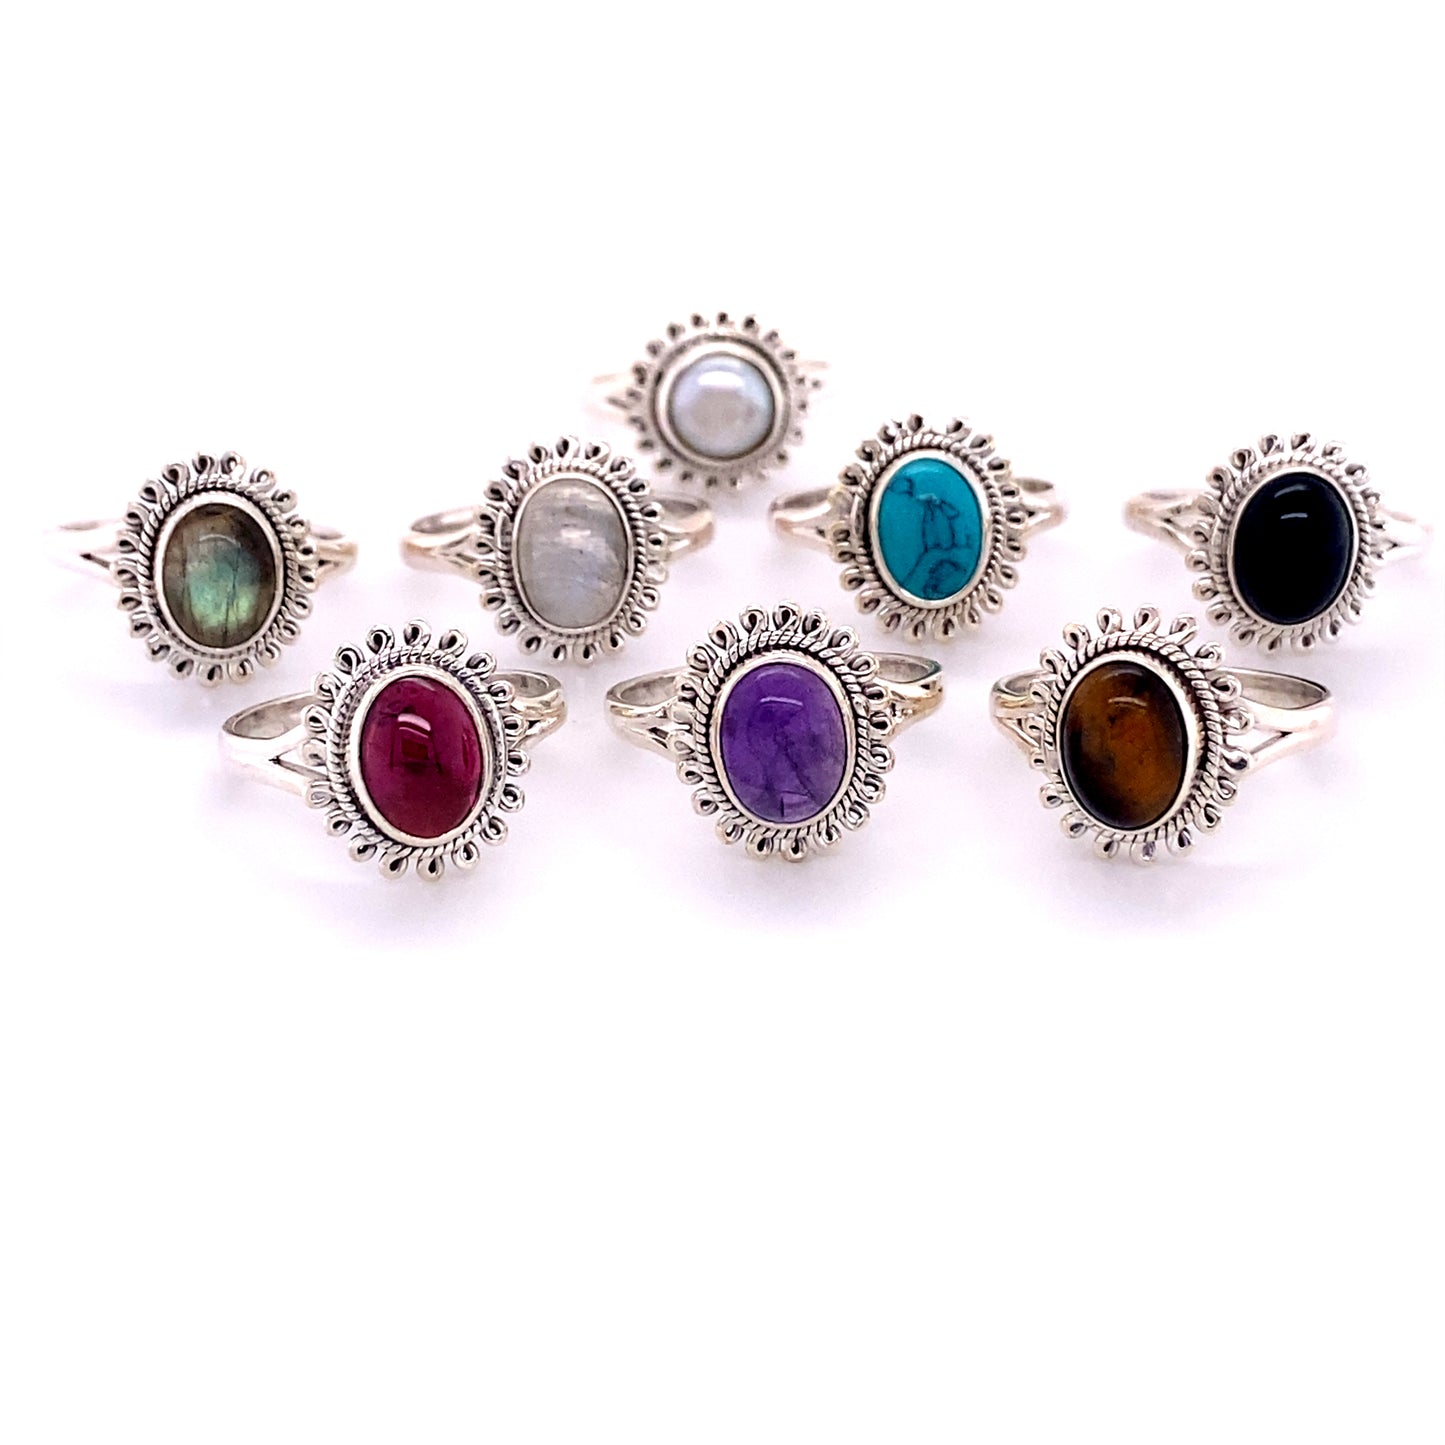 A Hippie-Chic Oval Gemstone Flower Ring-inspired set of sterling silver rings with different colored stones.